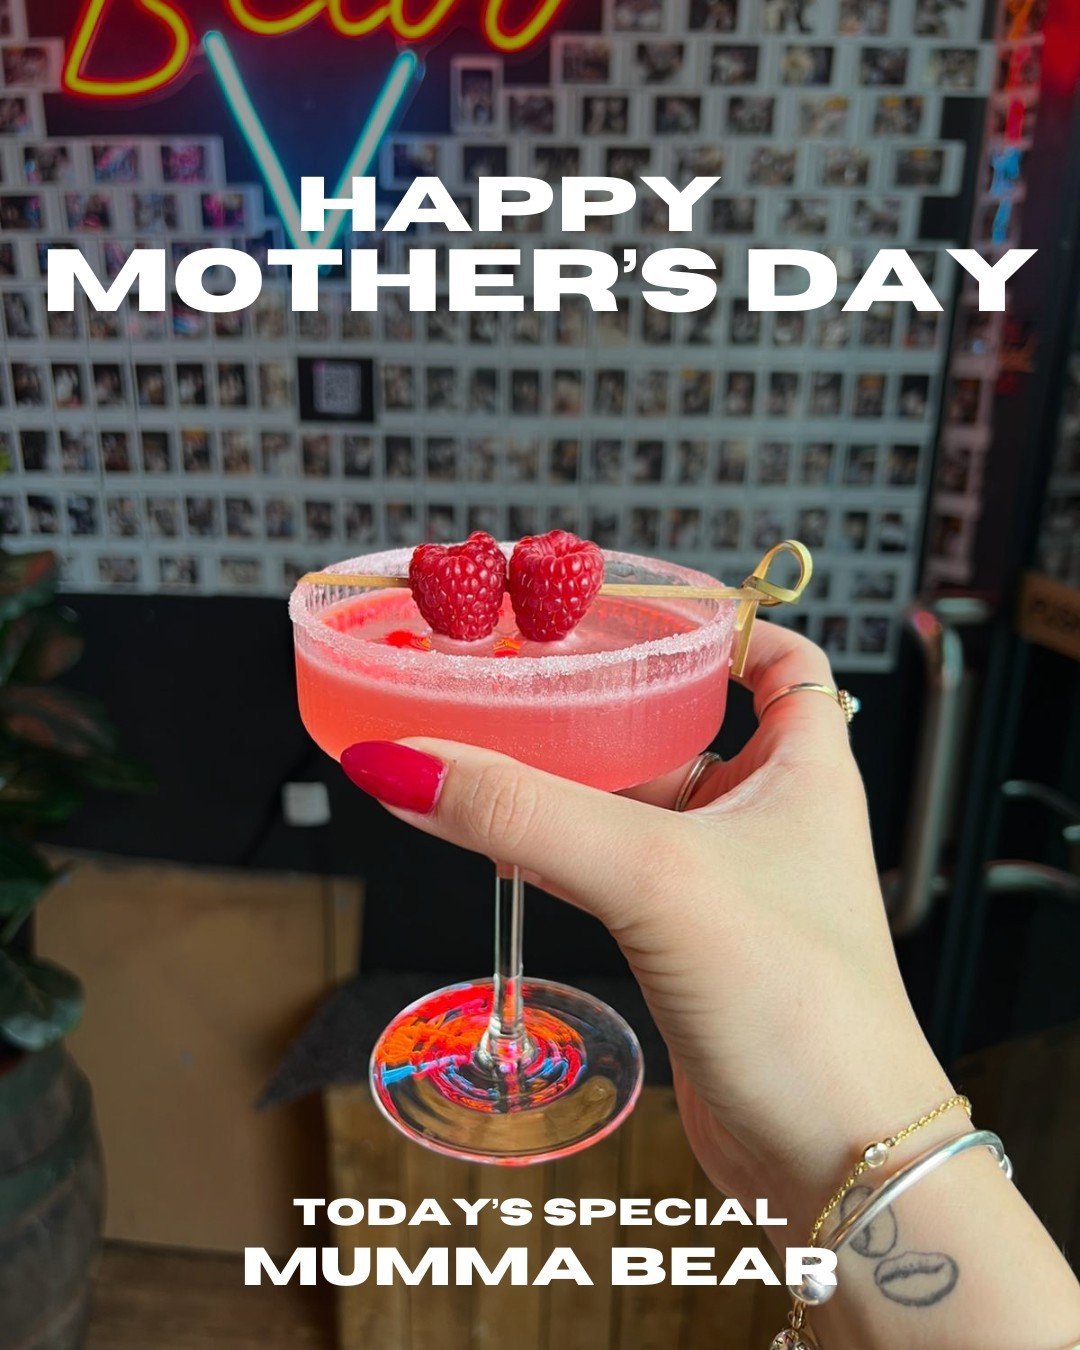 Happy Mother's Day, We appreciate all you do for us. 

Remember to come in and see us ... Mums receive one Free Mumma Bear cocktail 🍸🔥🐻